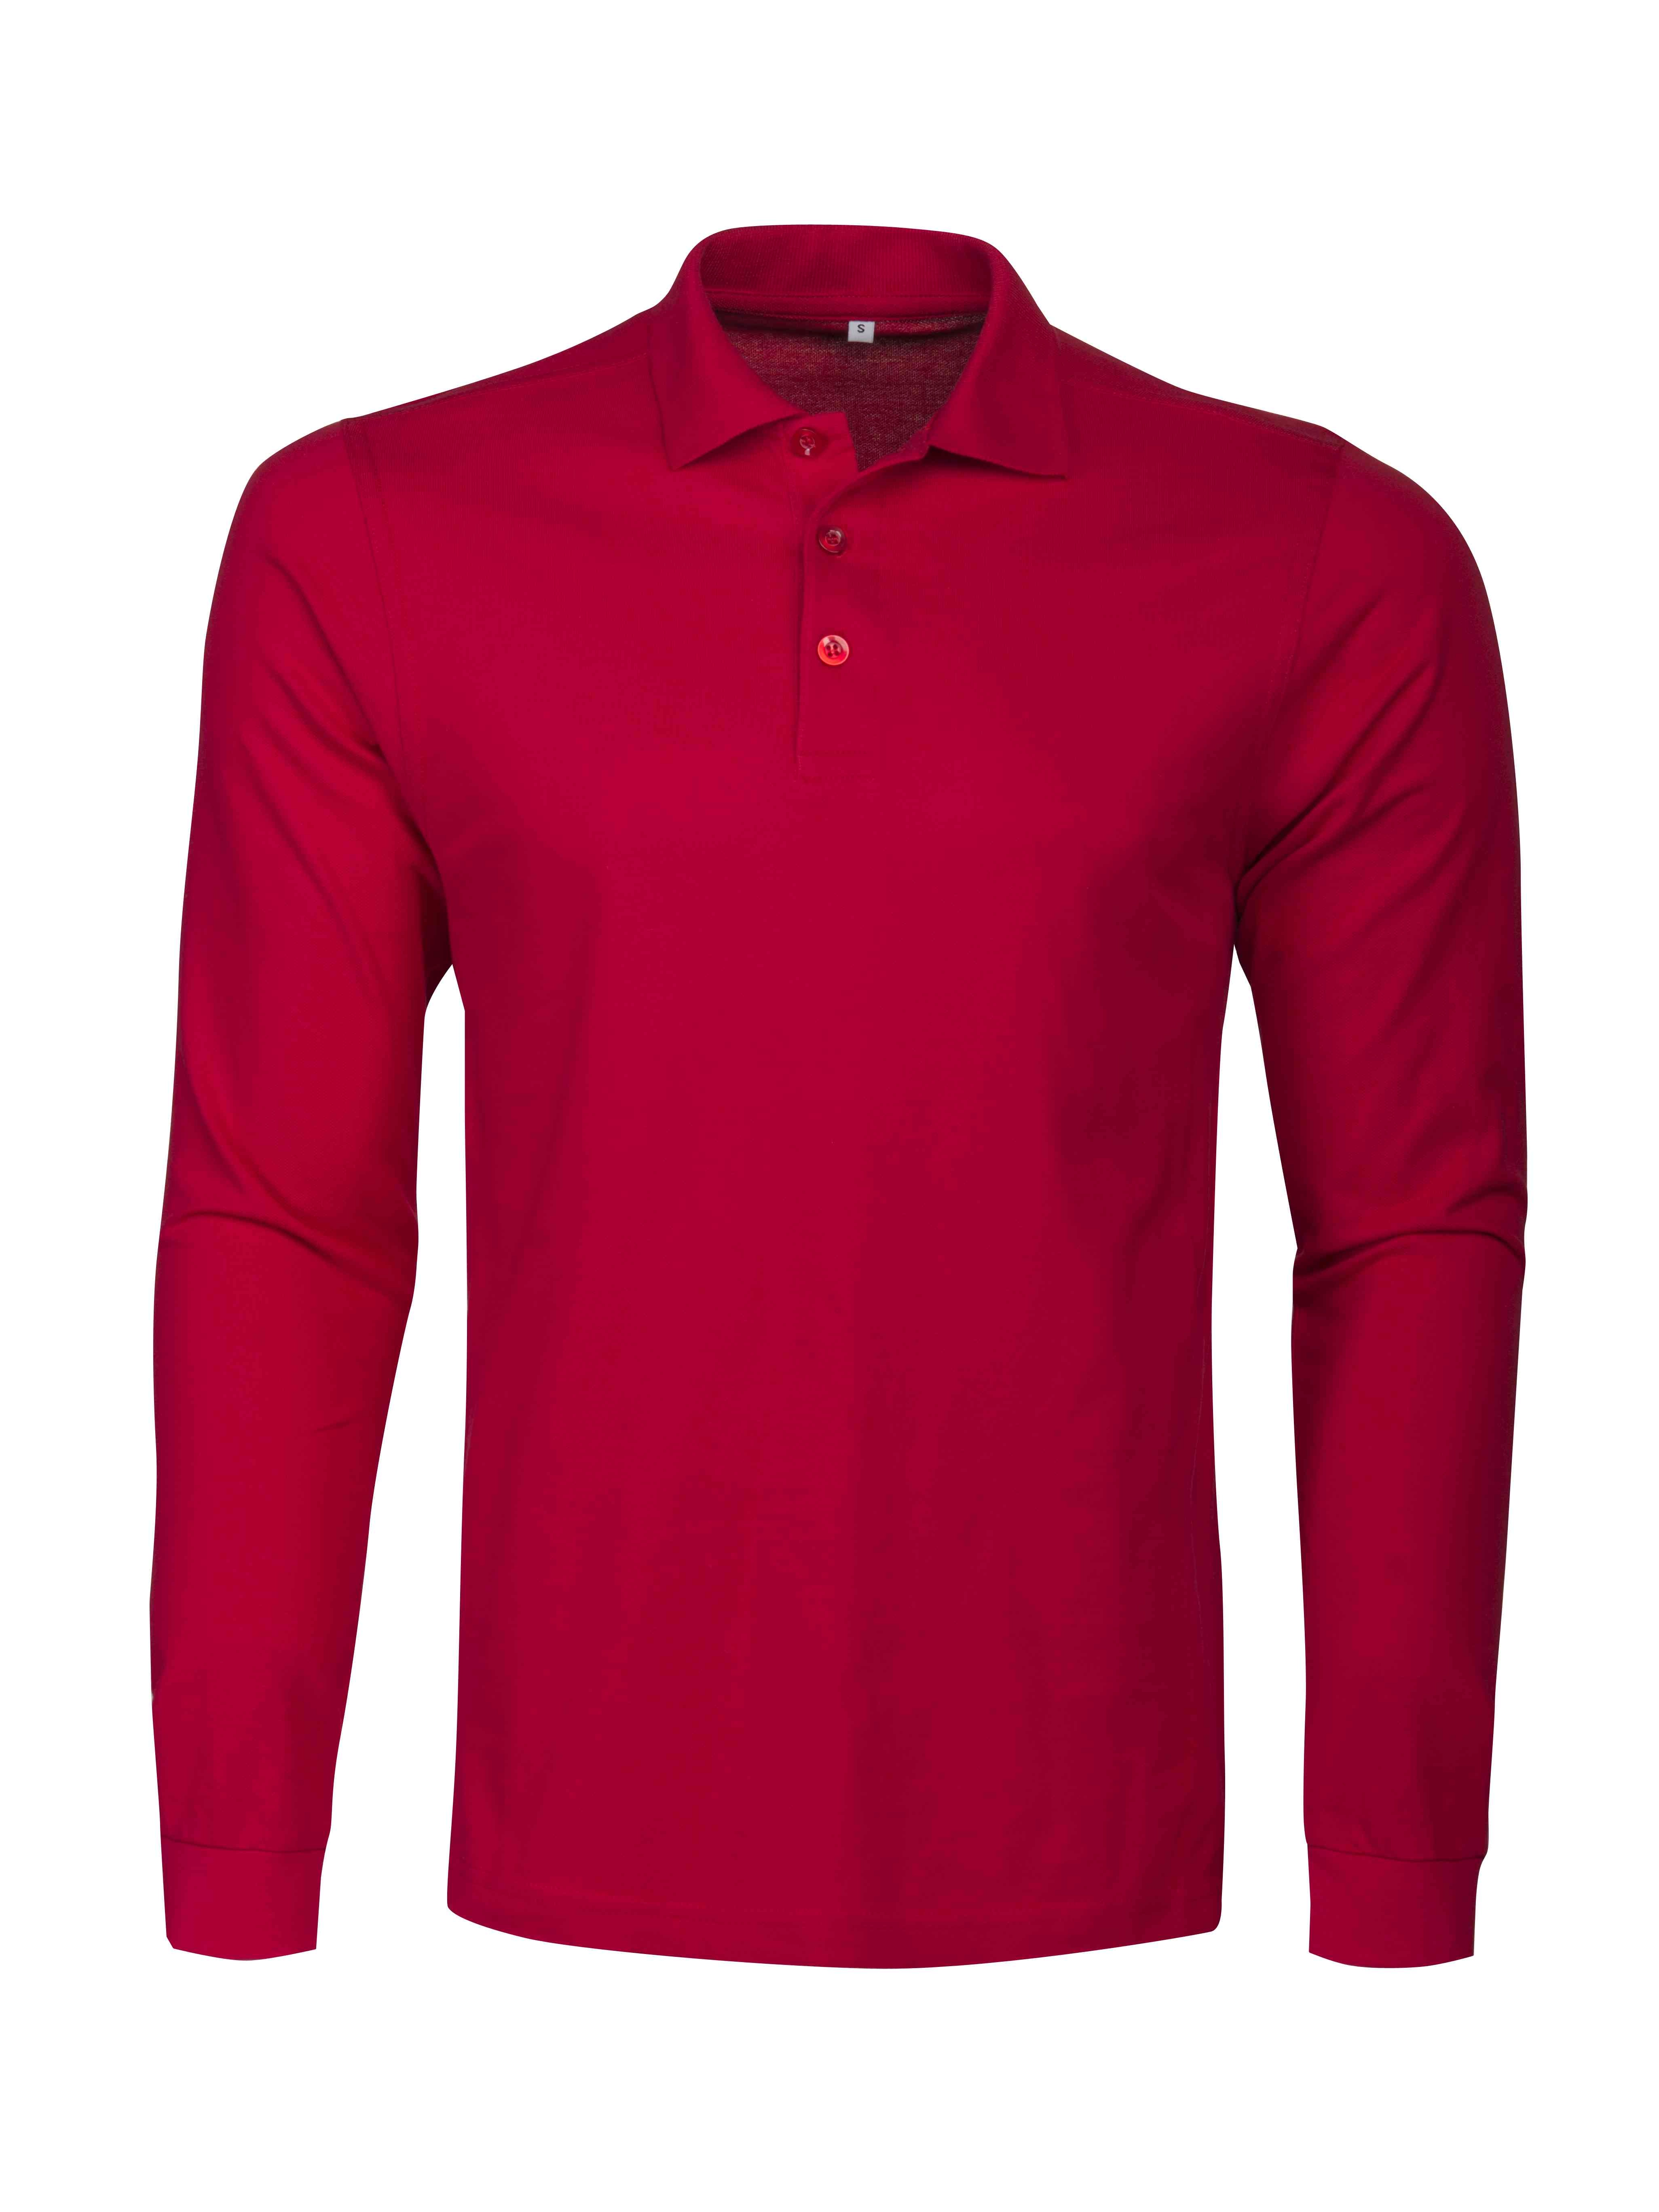 SURF POLO RSX L/S RED PE-2265011-400-5